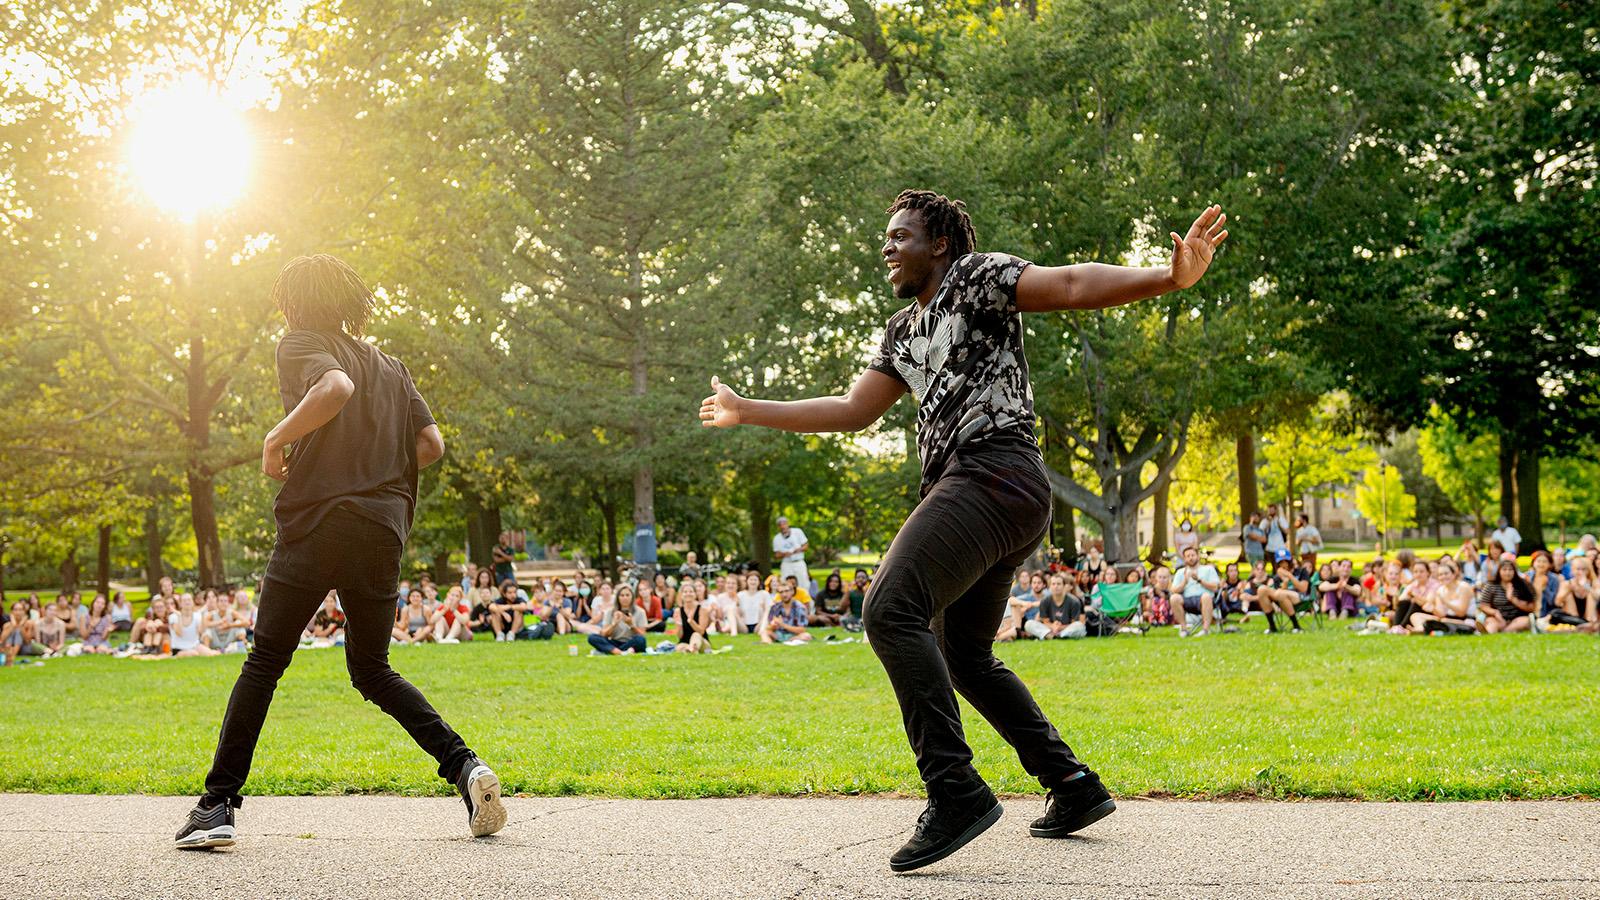 Two men in street clothes dance on the pavement in a park, in front of an audience seated in the grass.